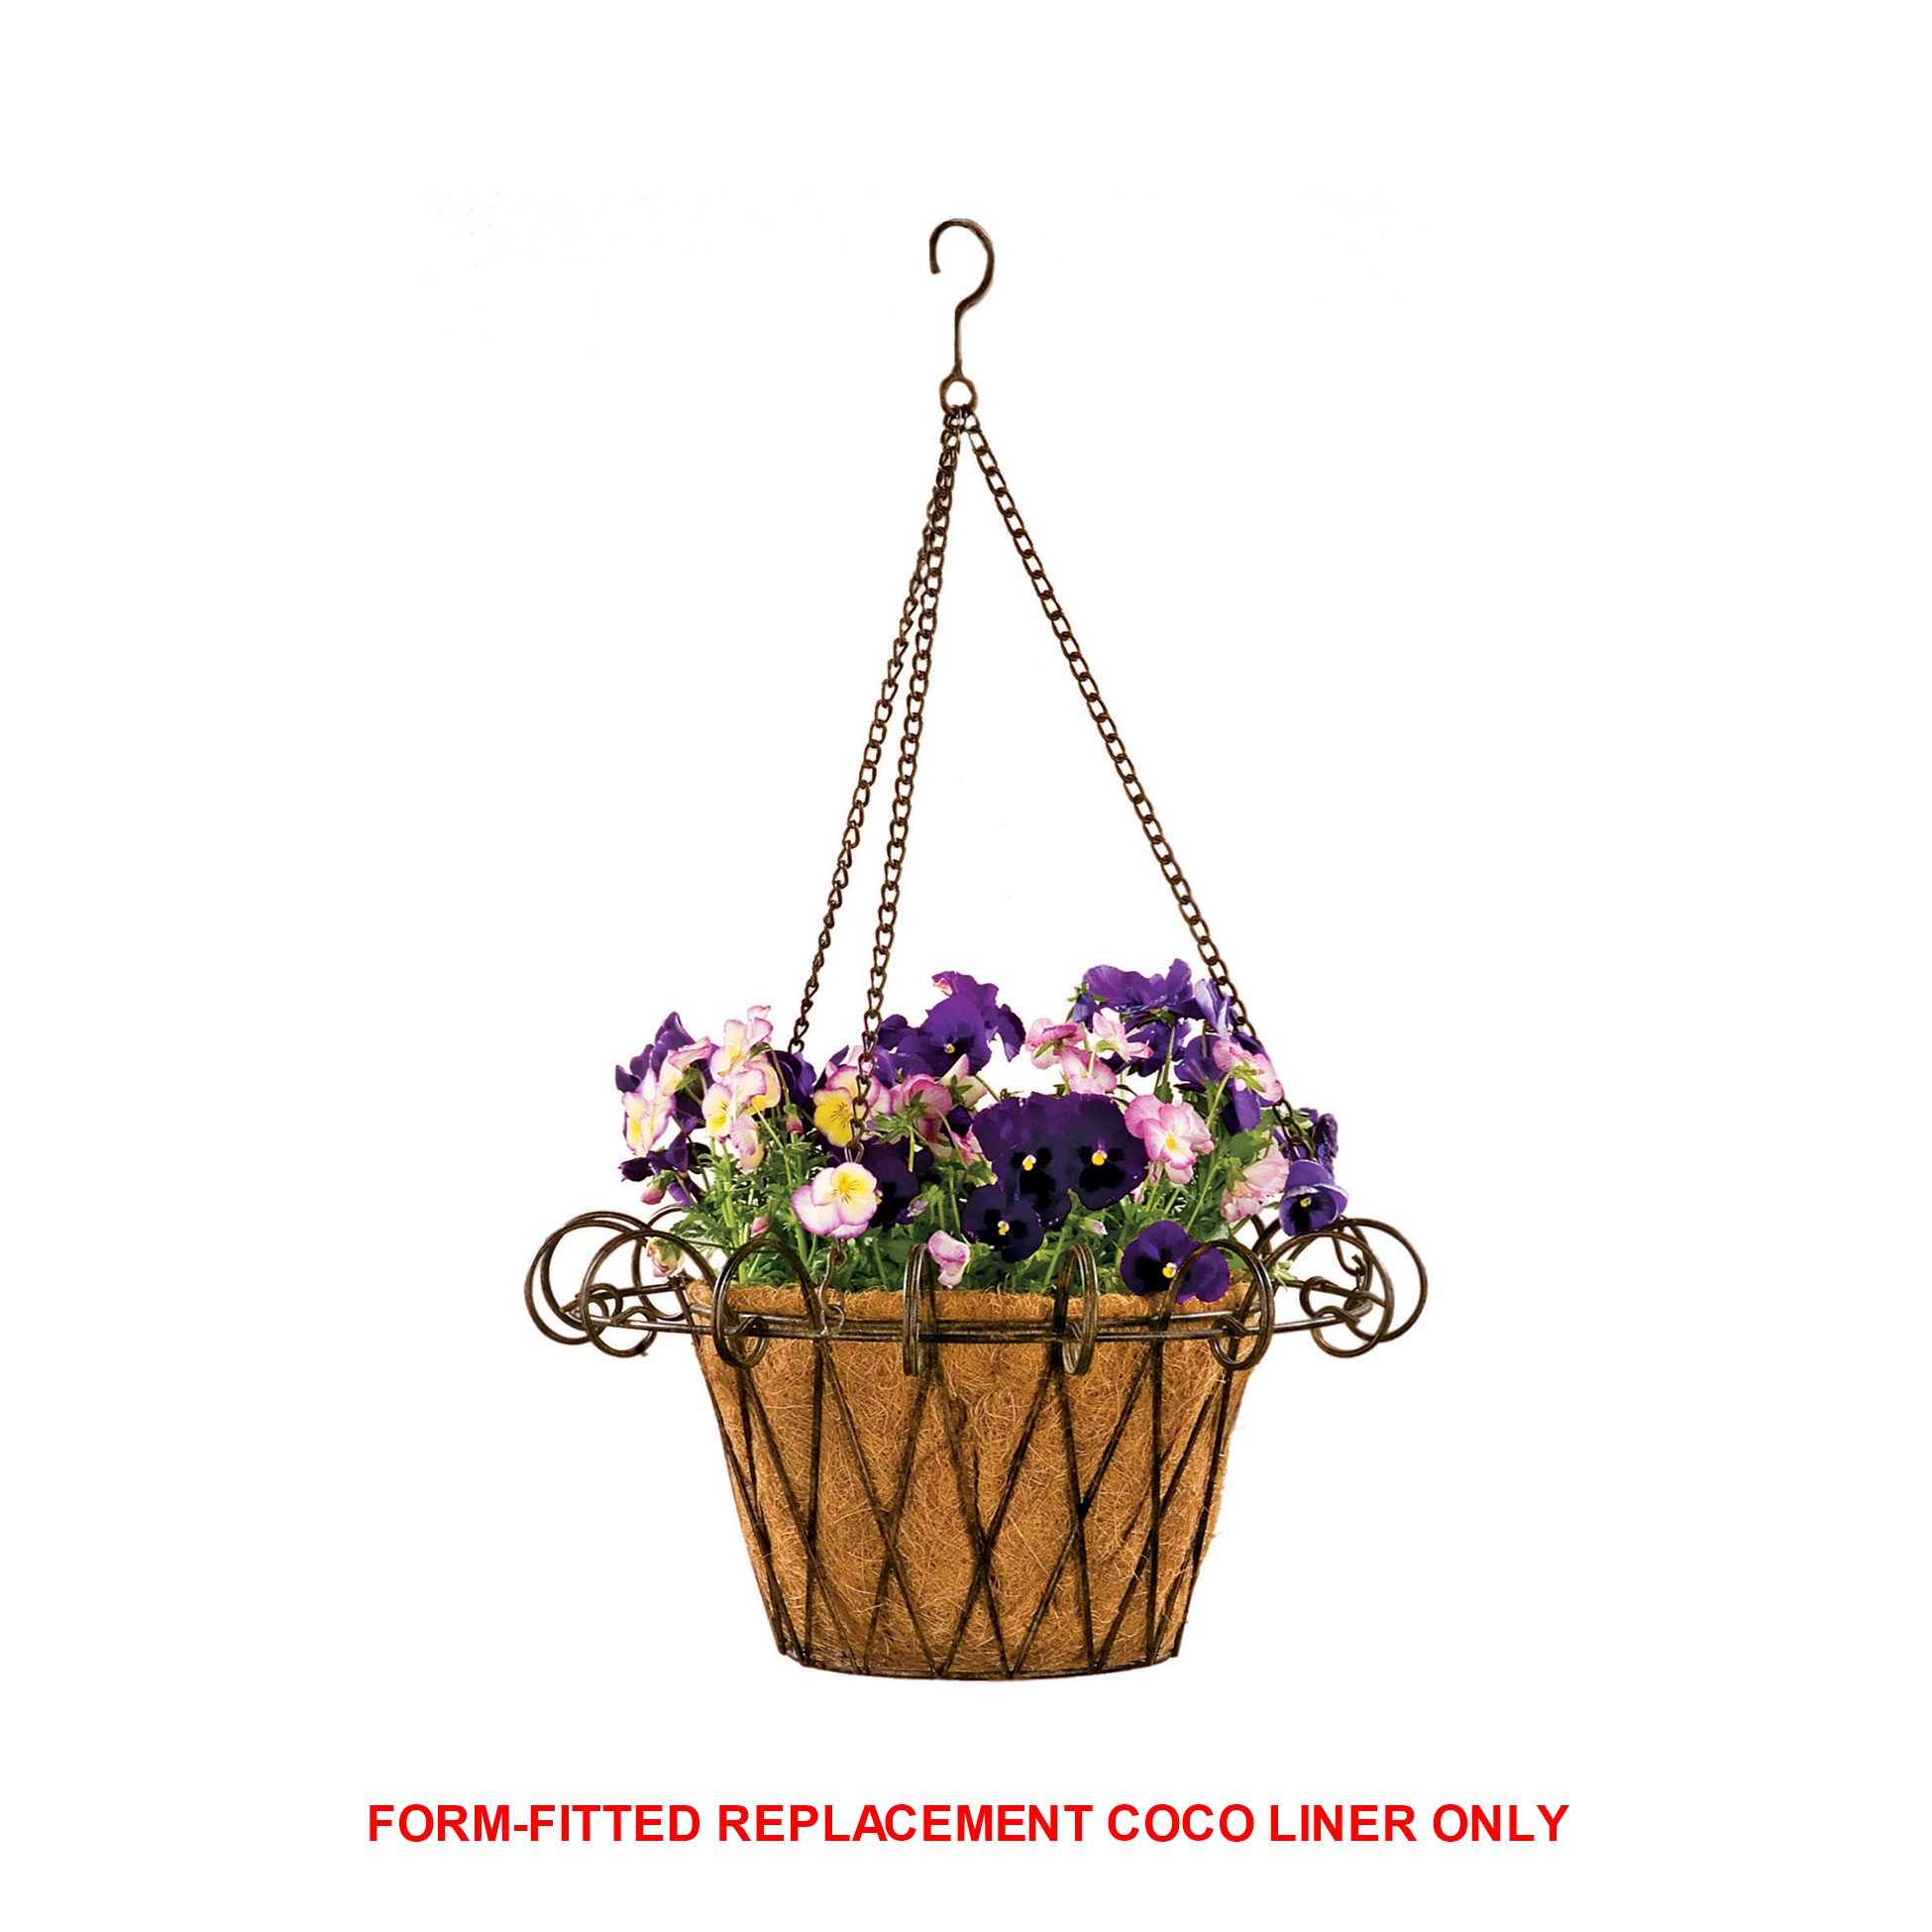 Deer Park Ironworks Replacement Coco Liner for French Hanging Basket (BA131)